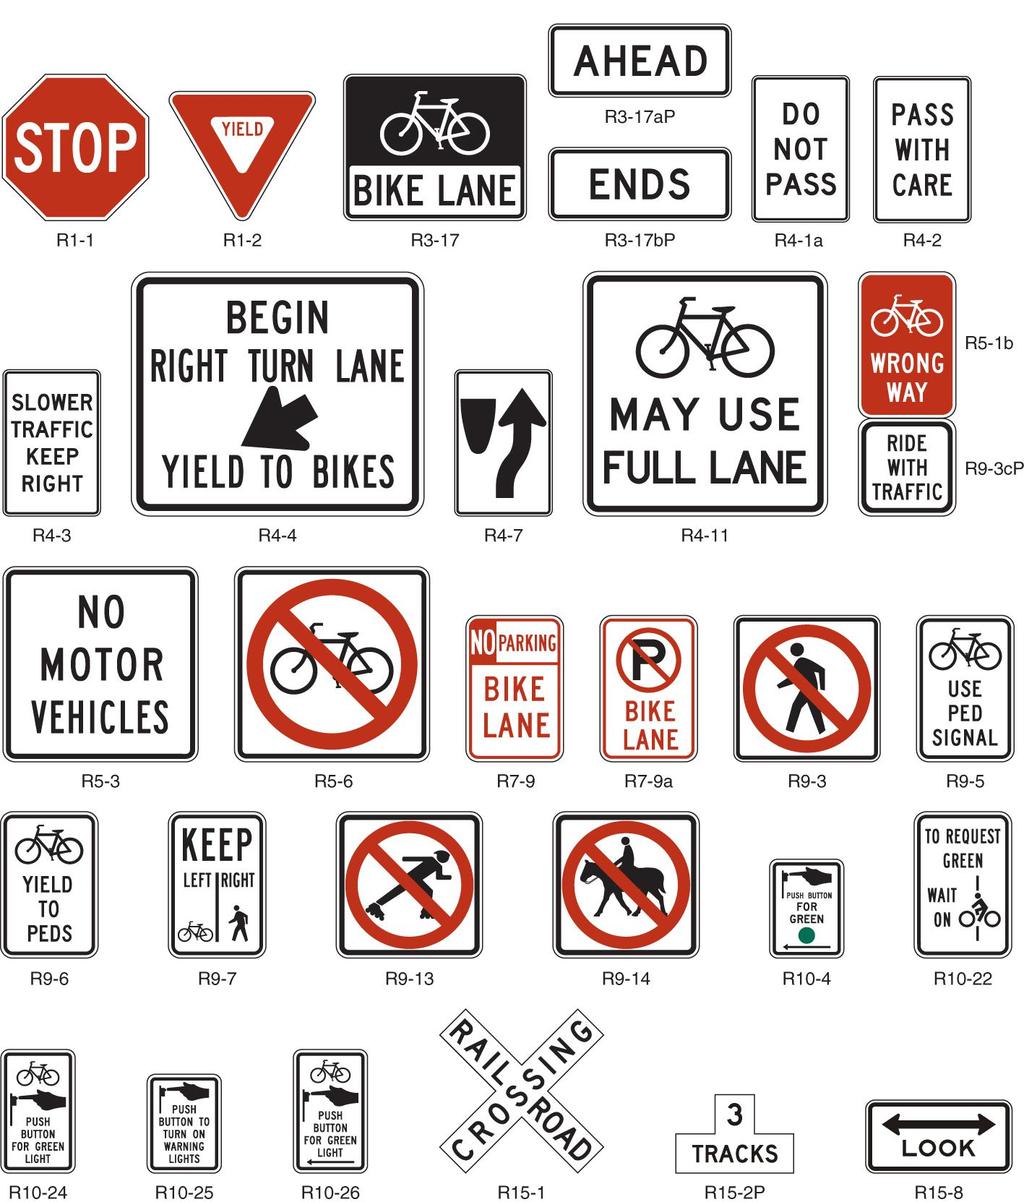 Figure 41: Bicycle facilities signage from the 2003 edition of the Manual on Uniform Traffic Control Devices